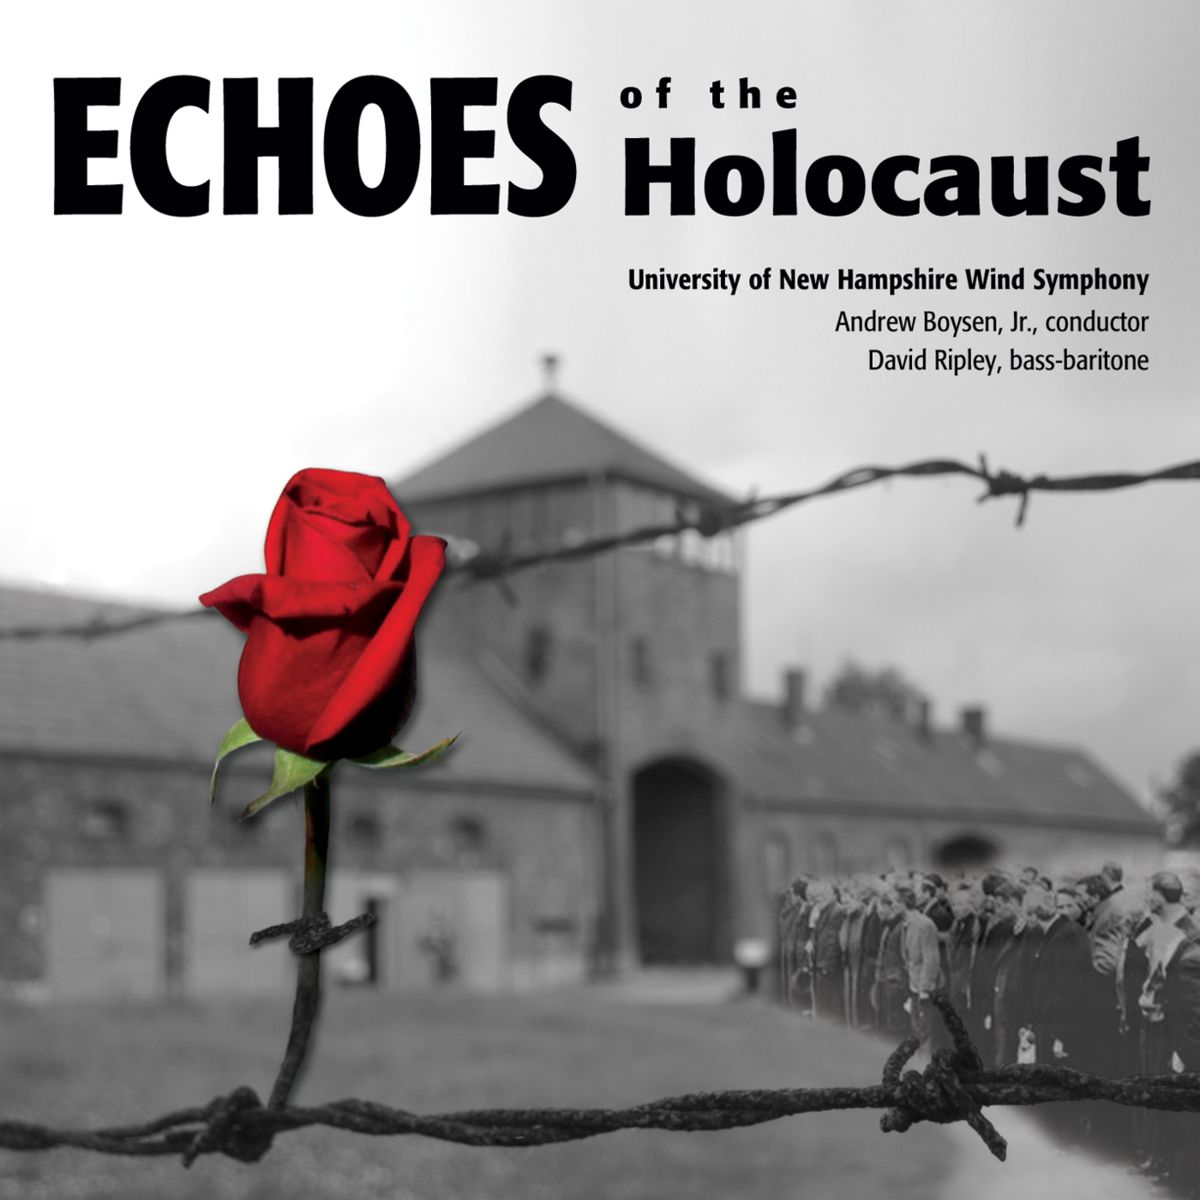 Echoes of the Holocaust - click here